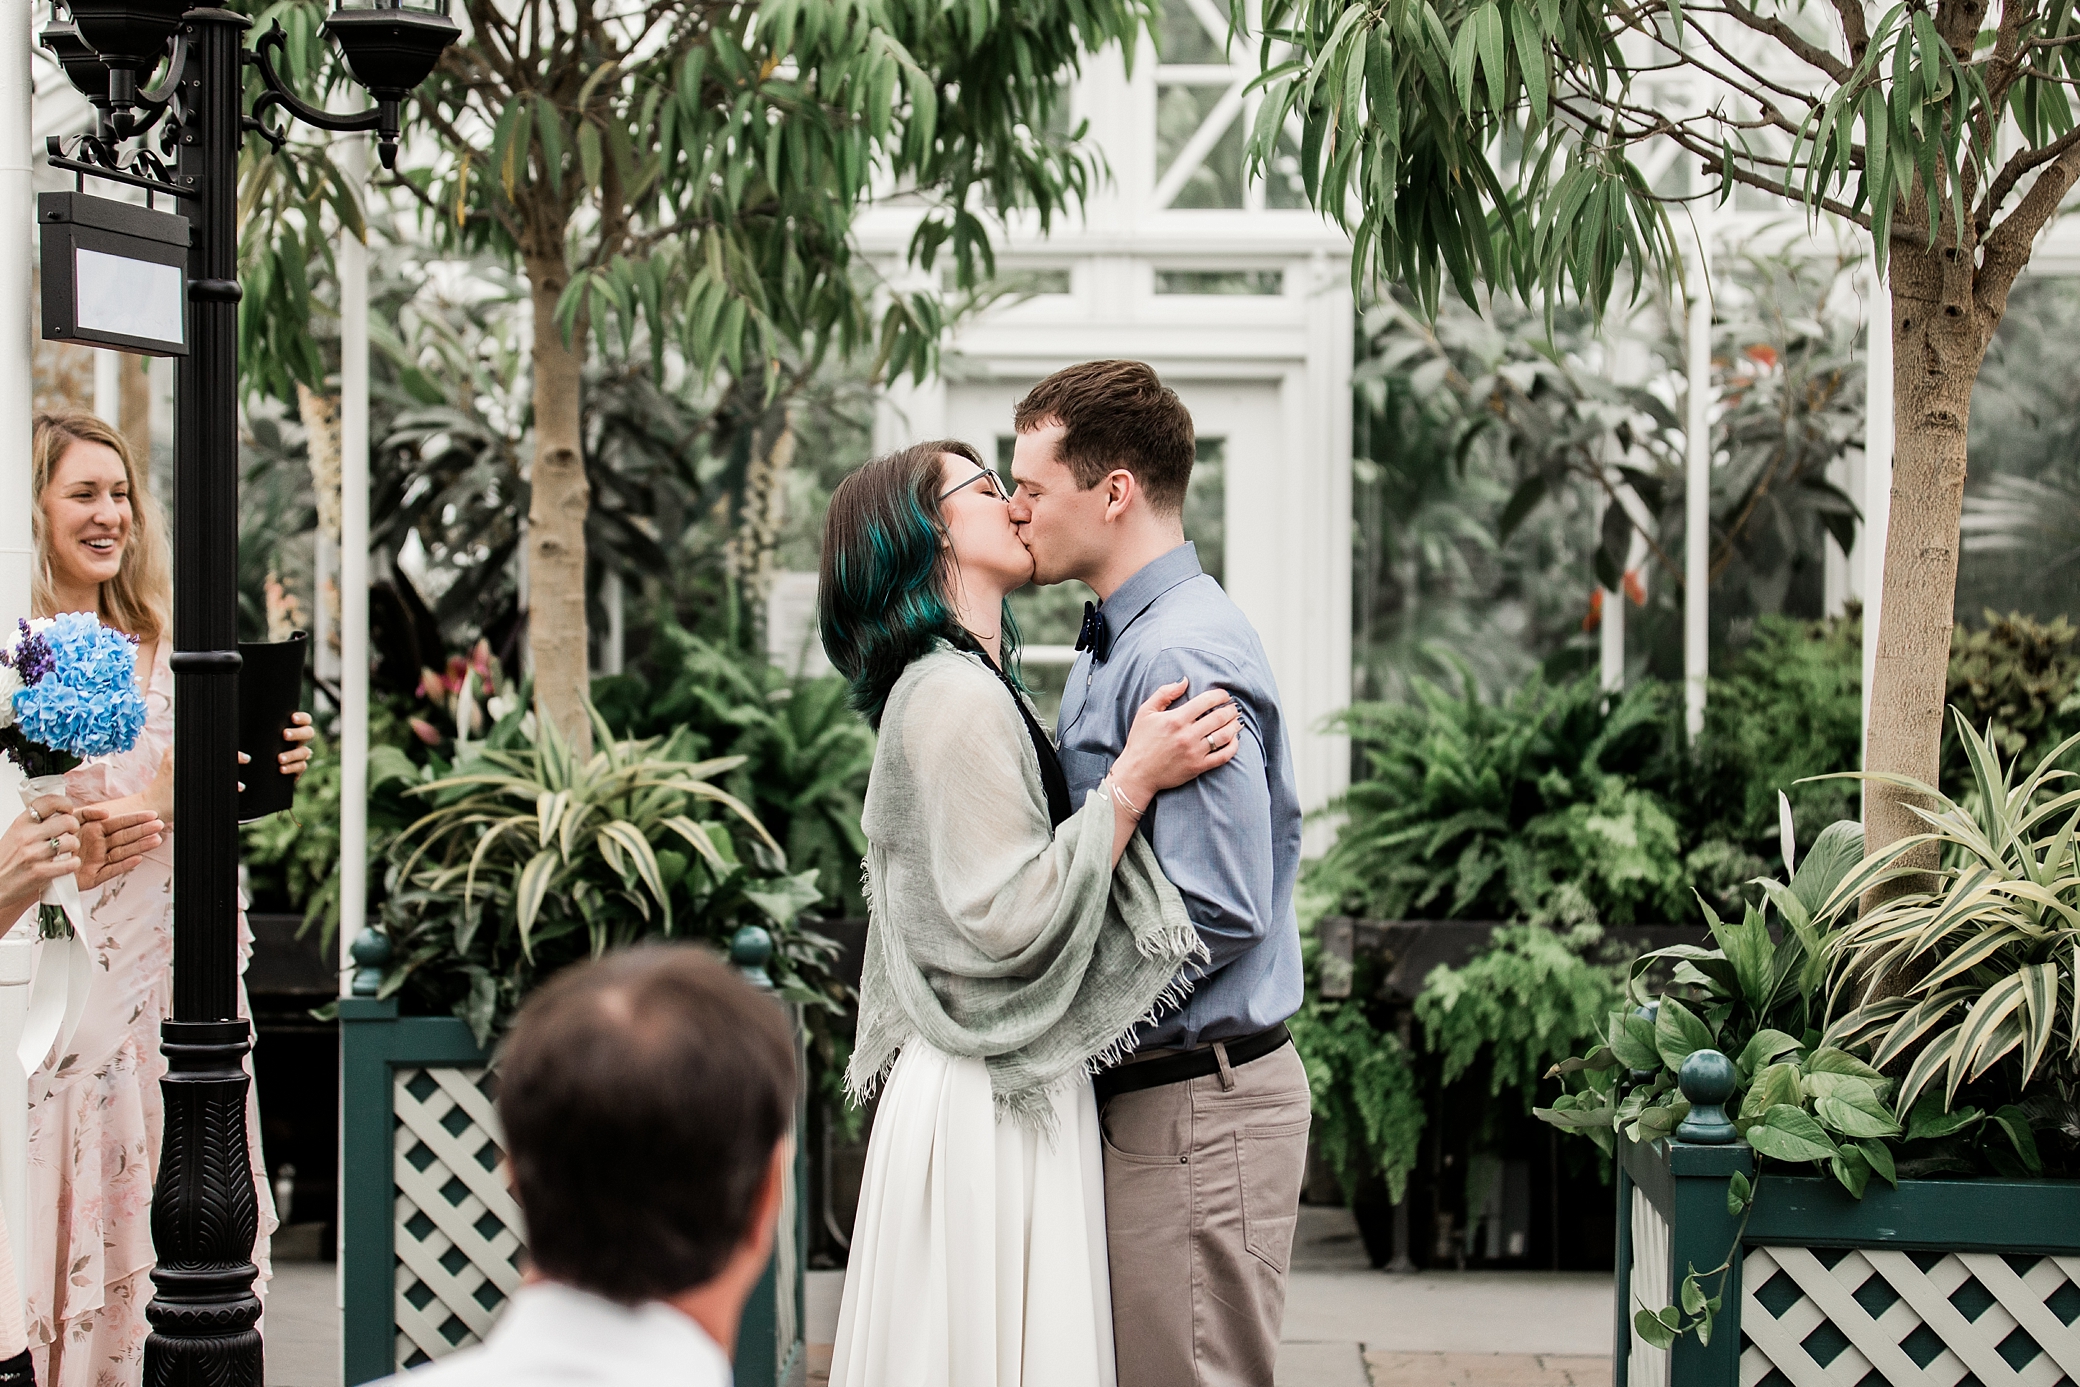 Bride and groom first kiss at Volunteer Park Conservatory Wedding Ceremony photographed by Seattle Wedding Photographer, Megan Montalvo Photography 